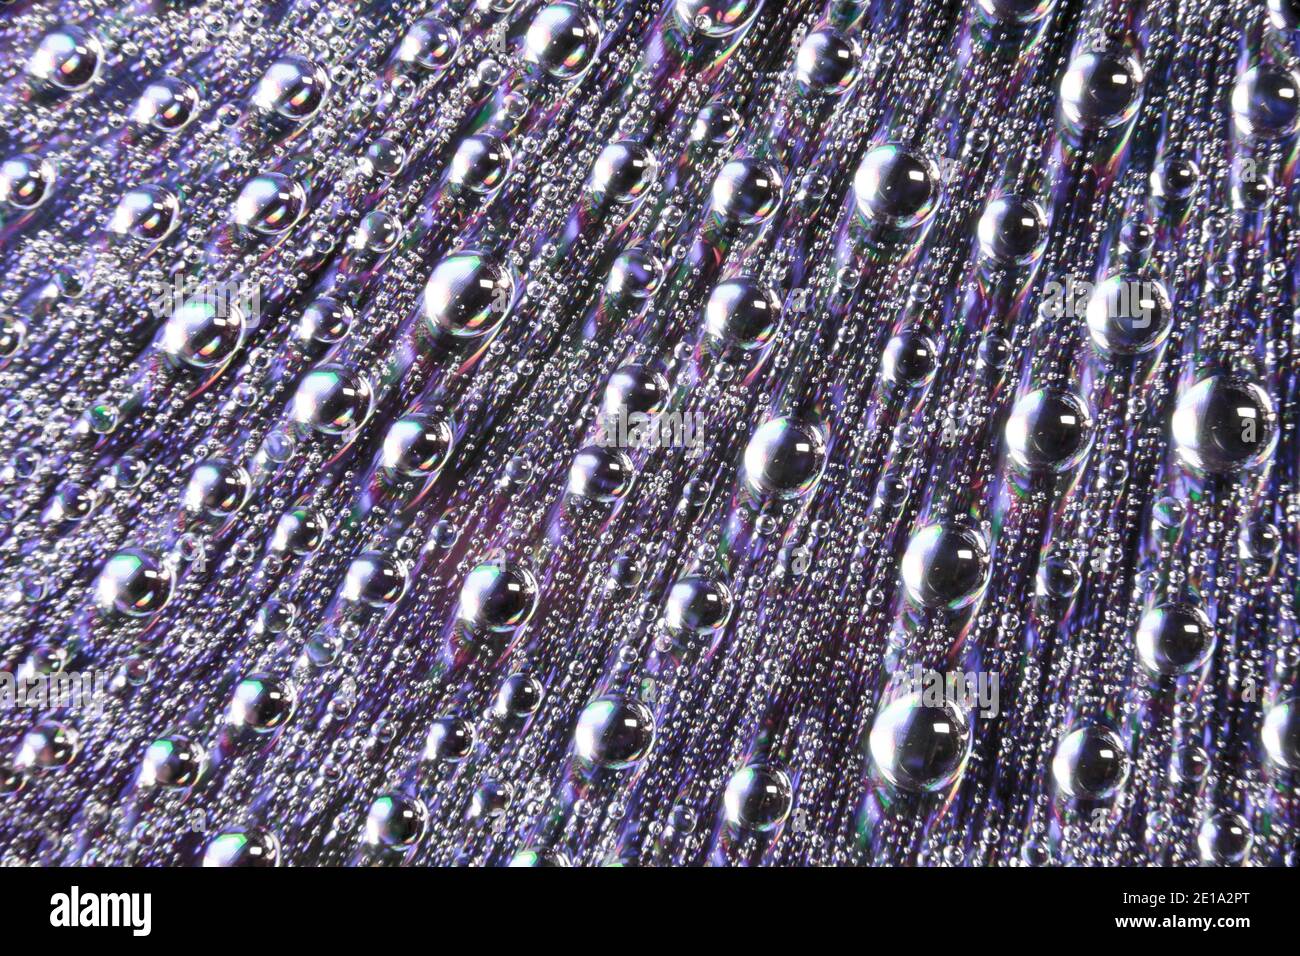 Water droplets on a reflective surface. England UK GB Stock Photo